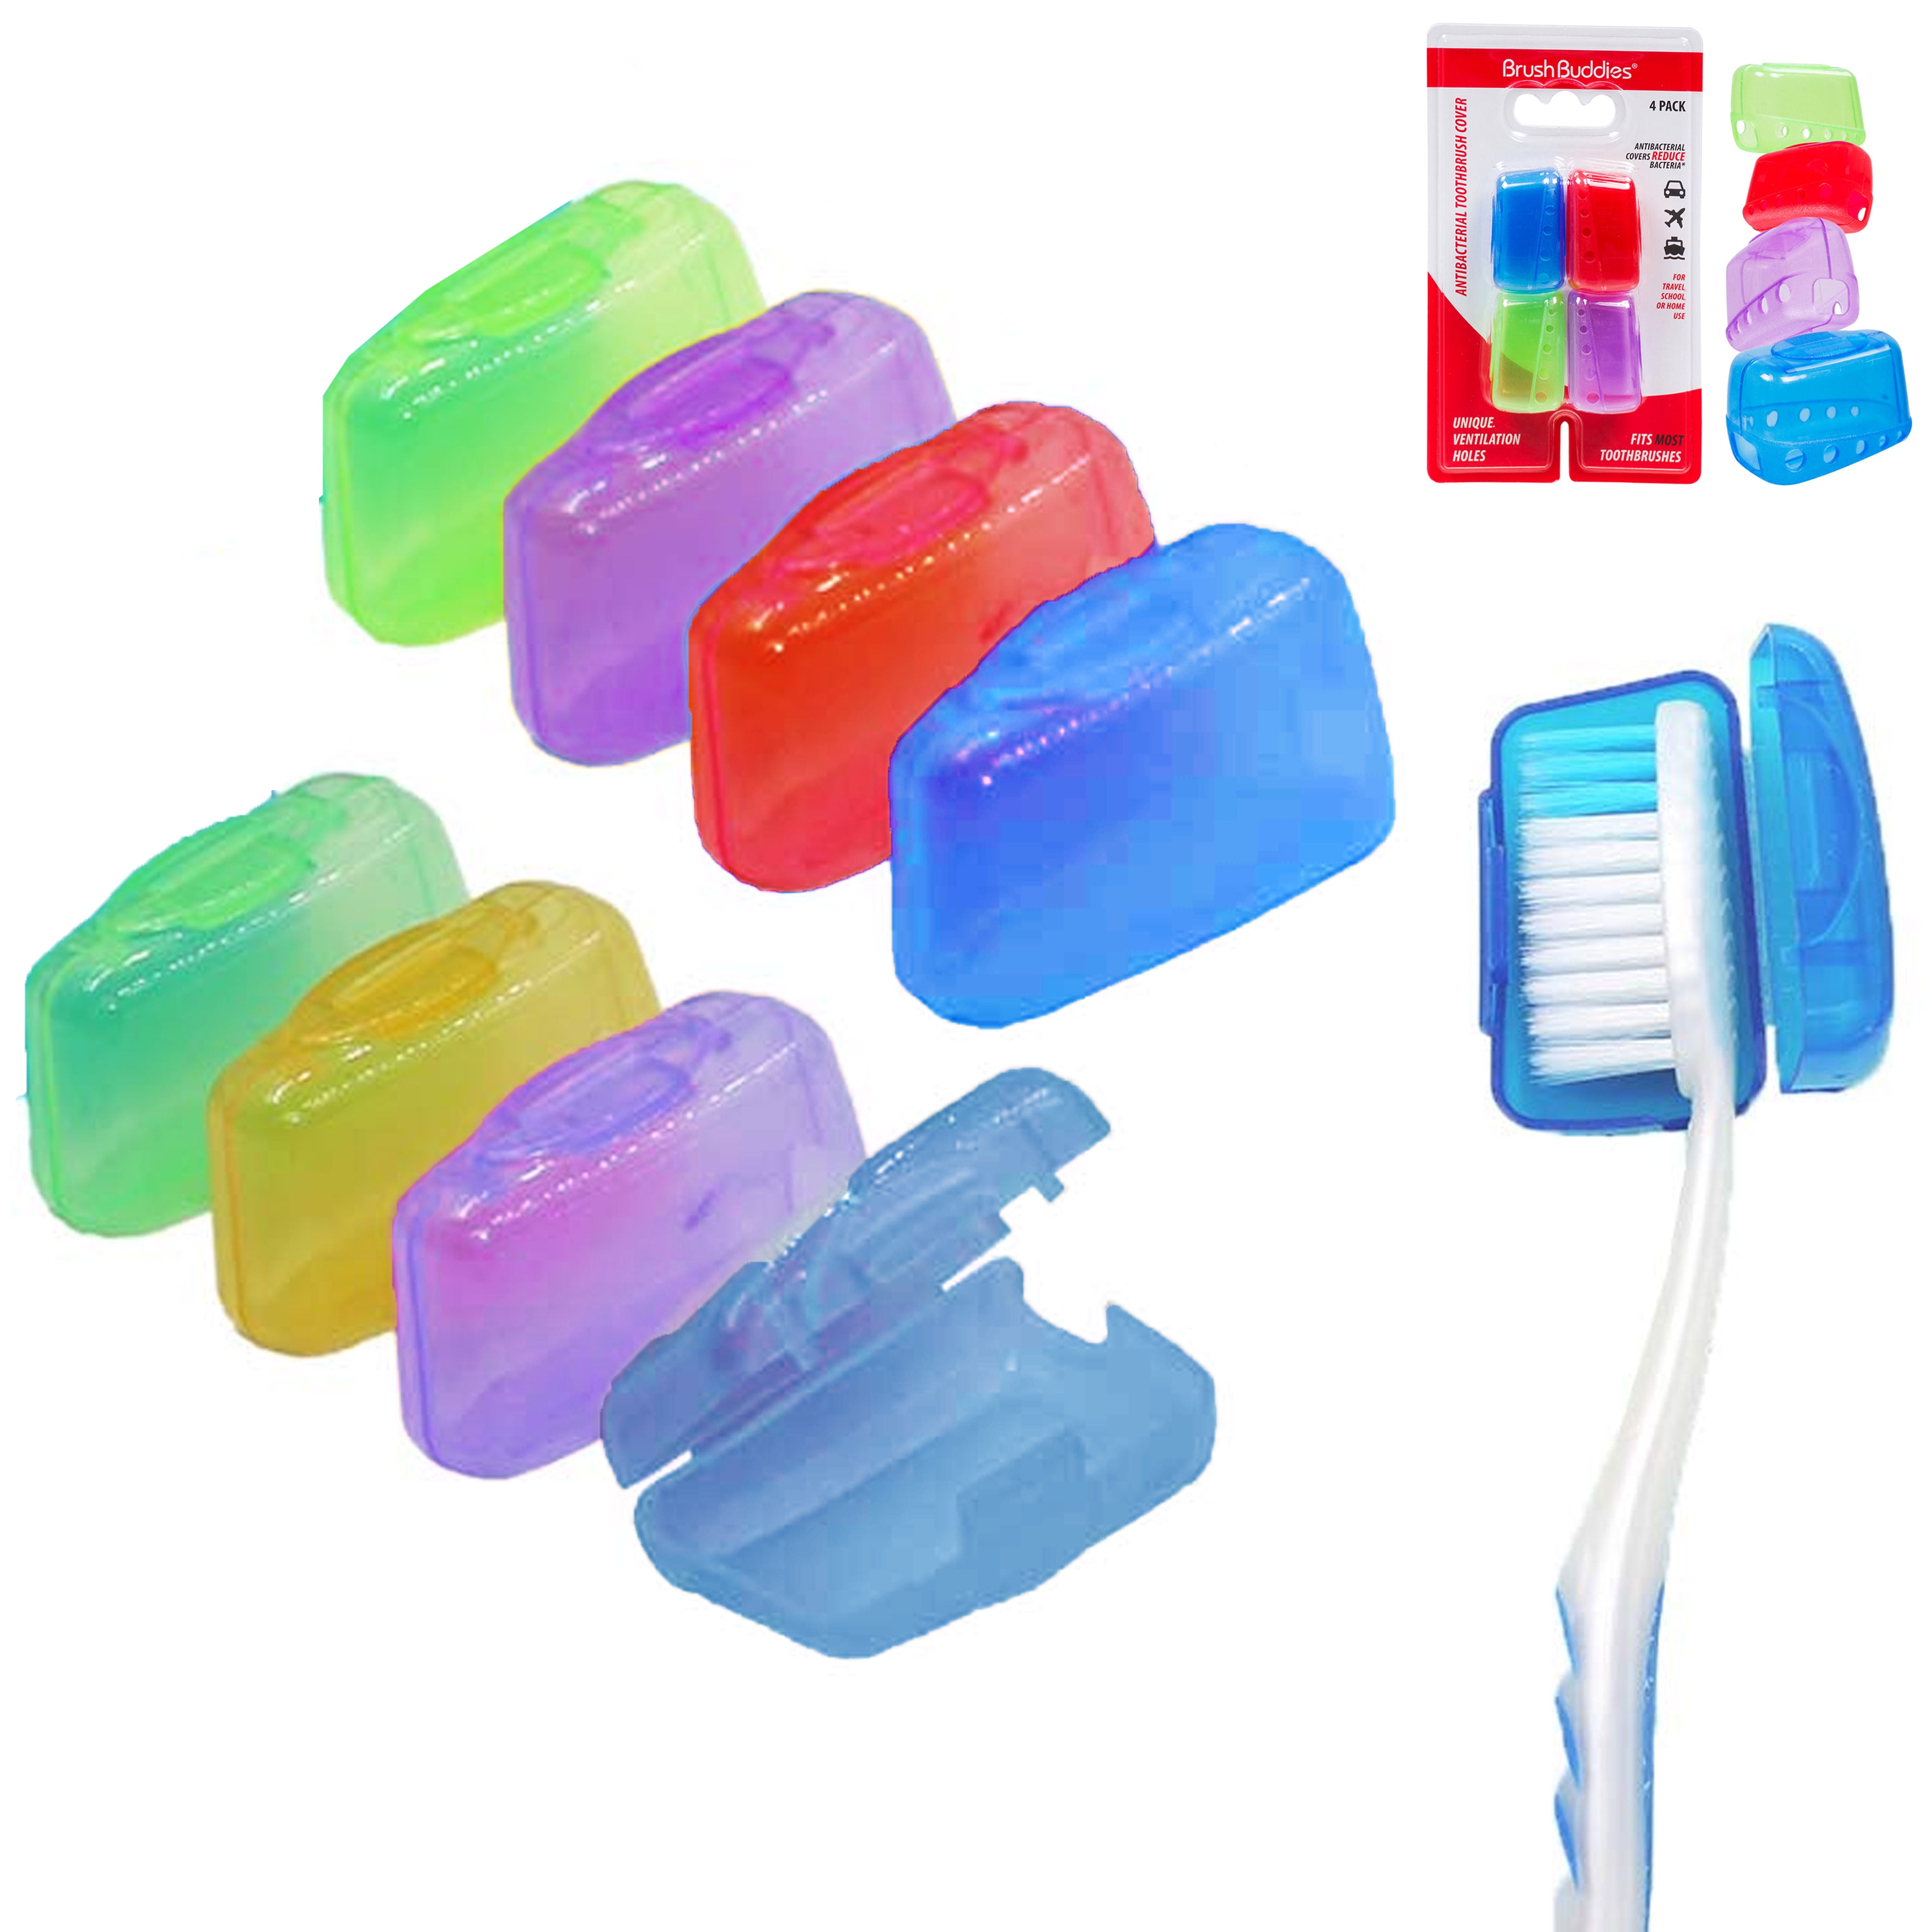 6pcs Slicone Anti Toothbrush Head Cover Case Cleaner Guards Caps 